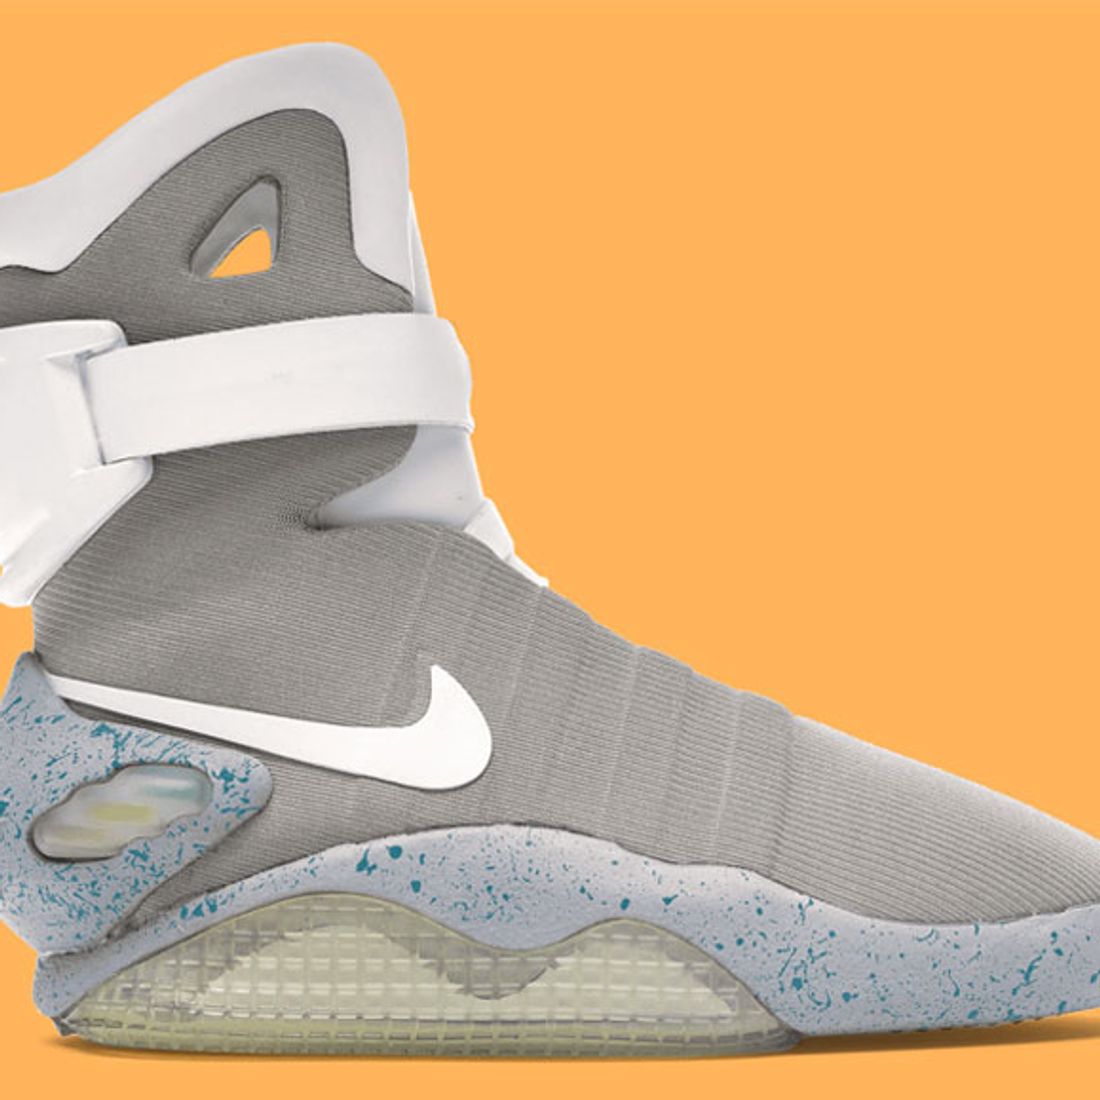 Pairs of the Nike Mag Reportedly Found in Storage Unit! - Freaker